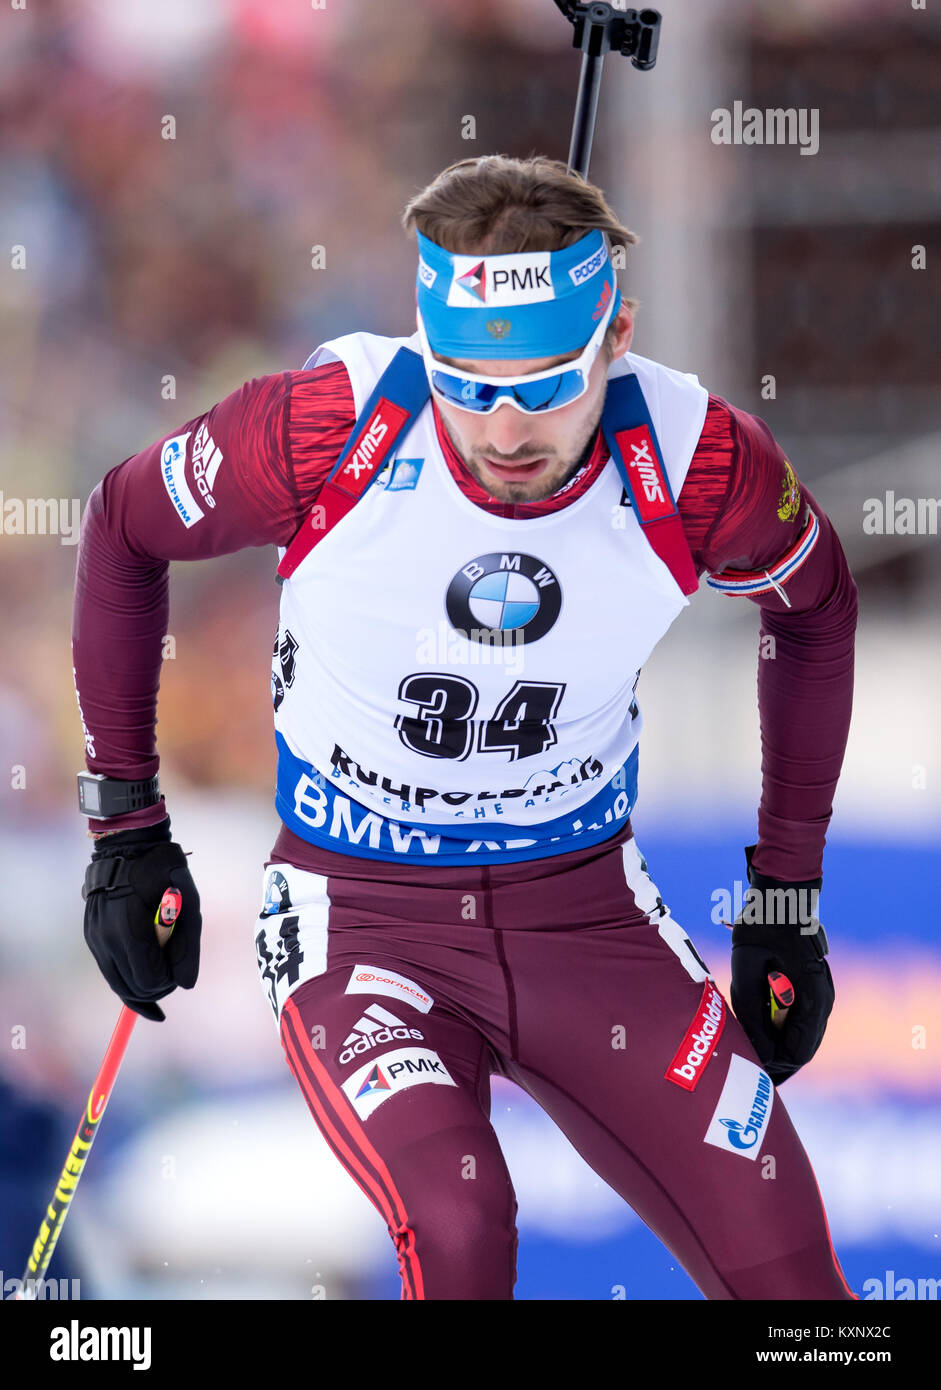 Ruhpolding, Germany. 10th Jan, 2018. Biathlet Anton Schipulin from Rusia skis during the race at Chiemgau Arena in Ruhpolding, Germany, 10 January 2018. Credit: Sven Hoppe/dpa/Alamy Live News Stock Photo